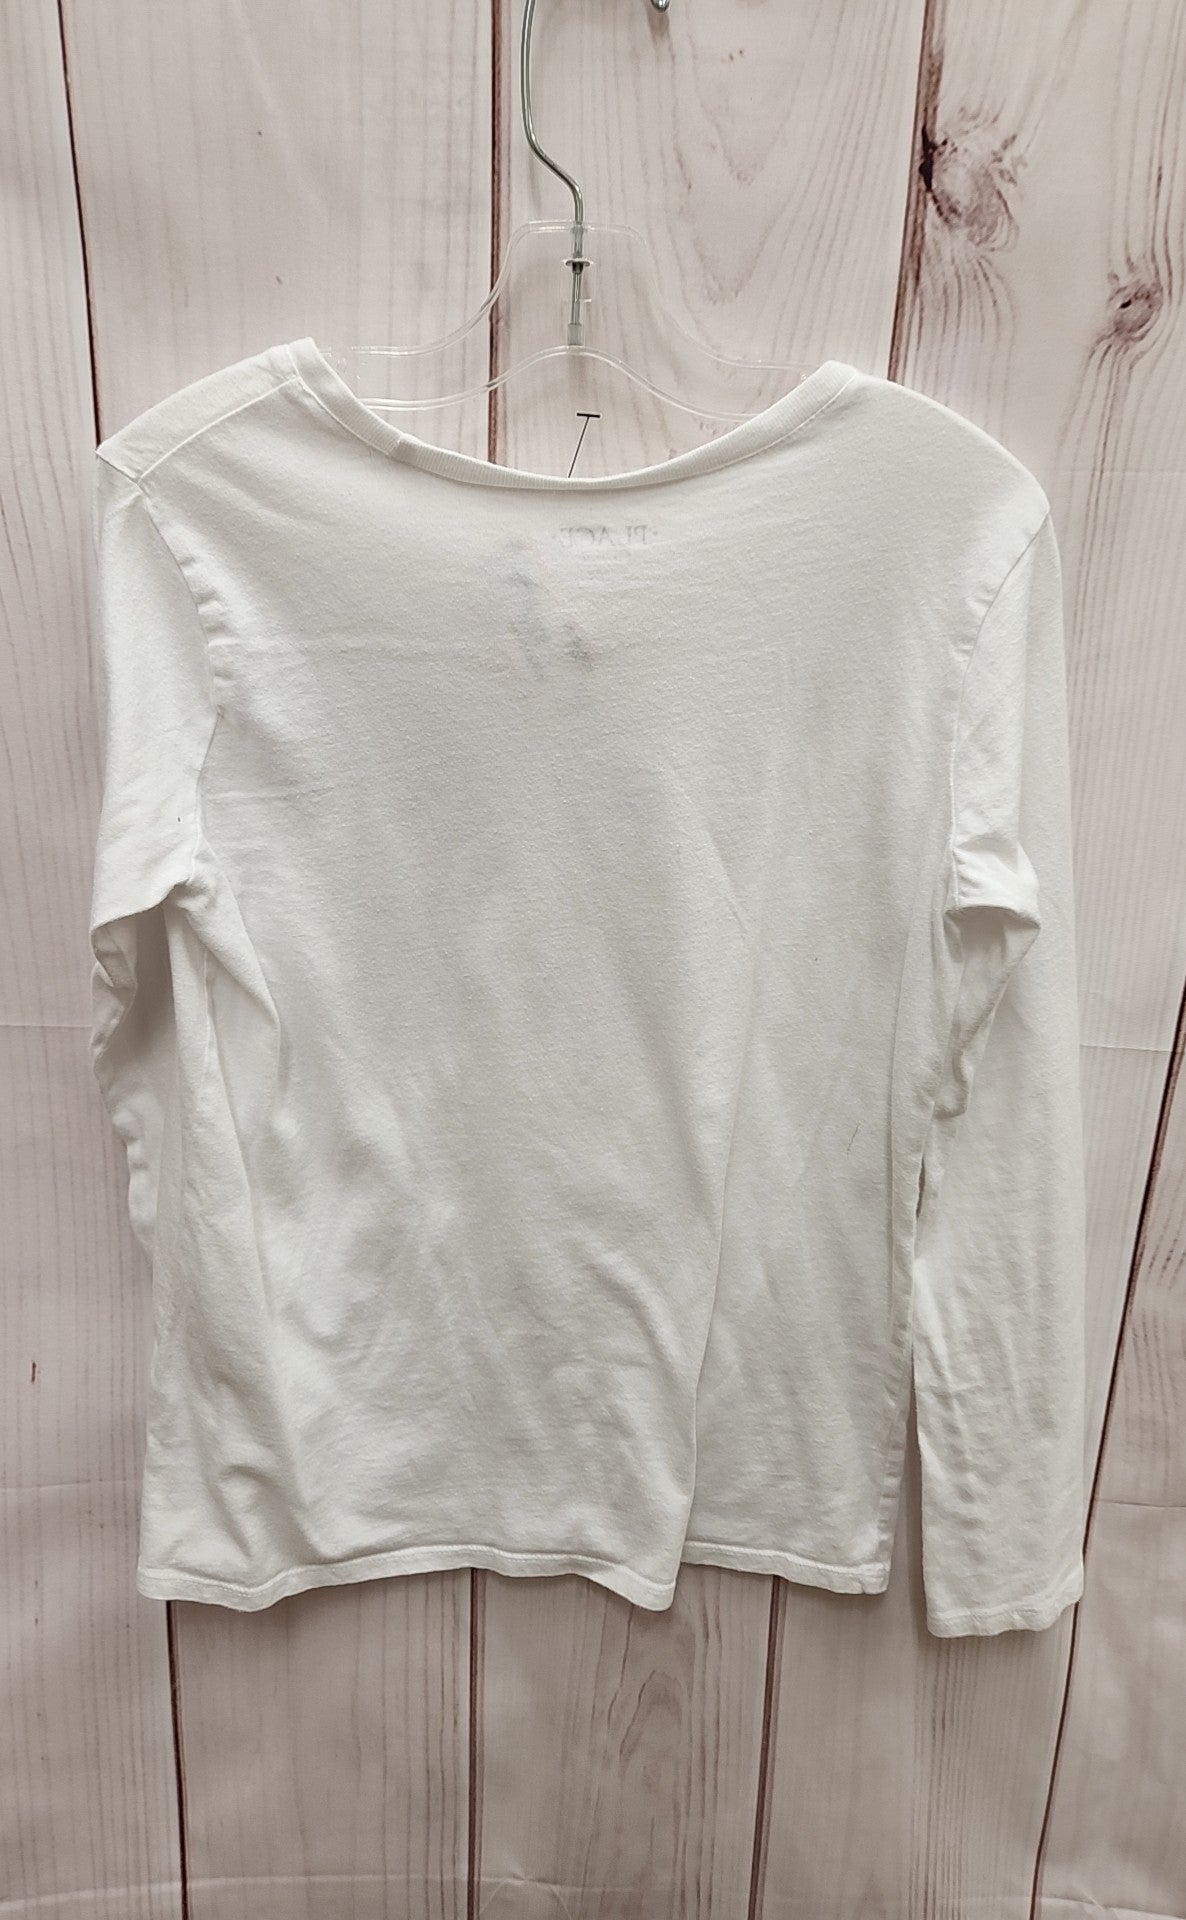 Place Girl's Size 10/12 White Shirt